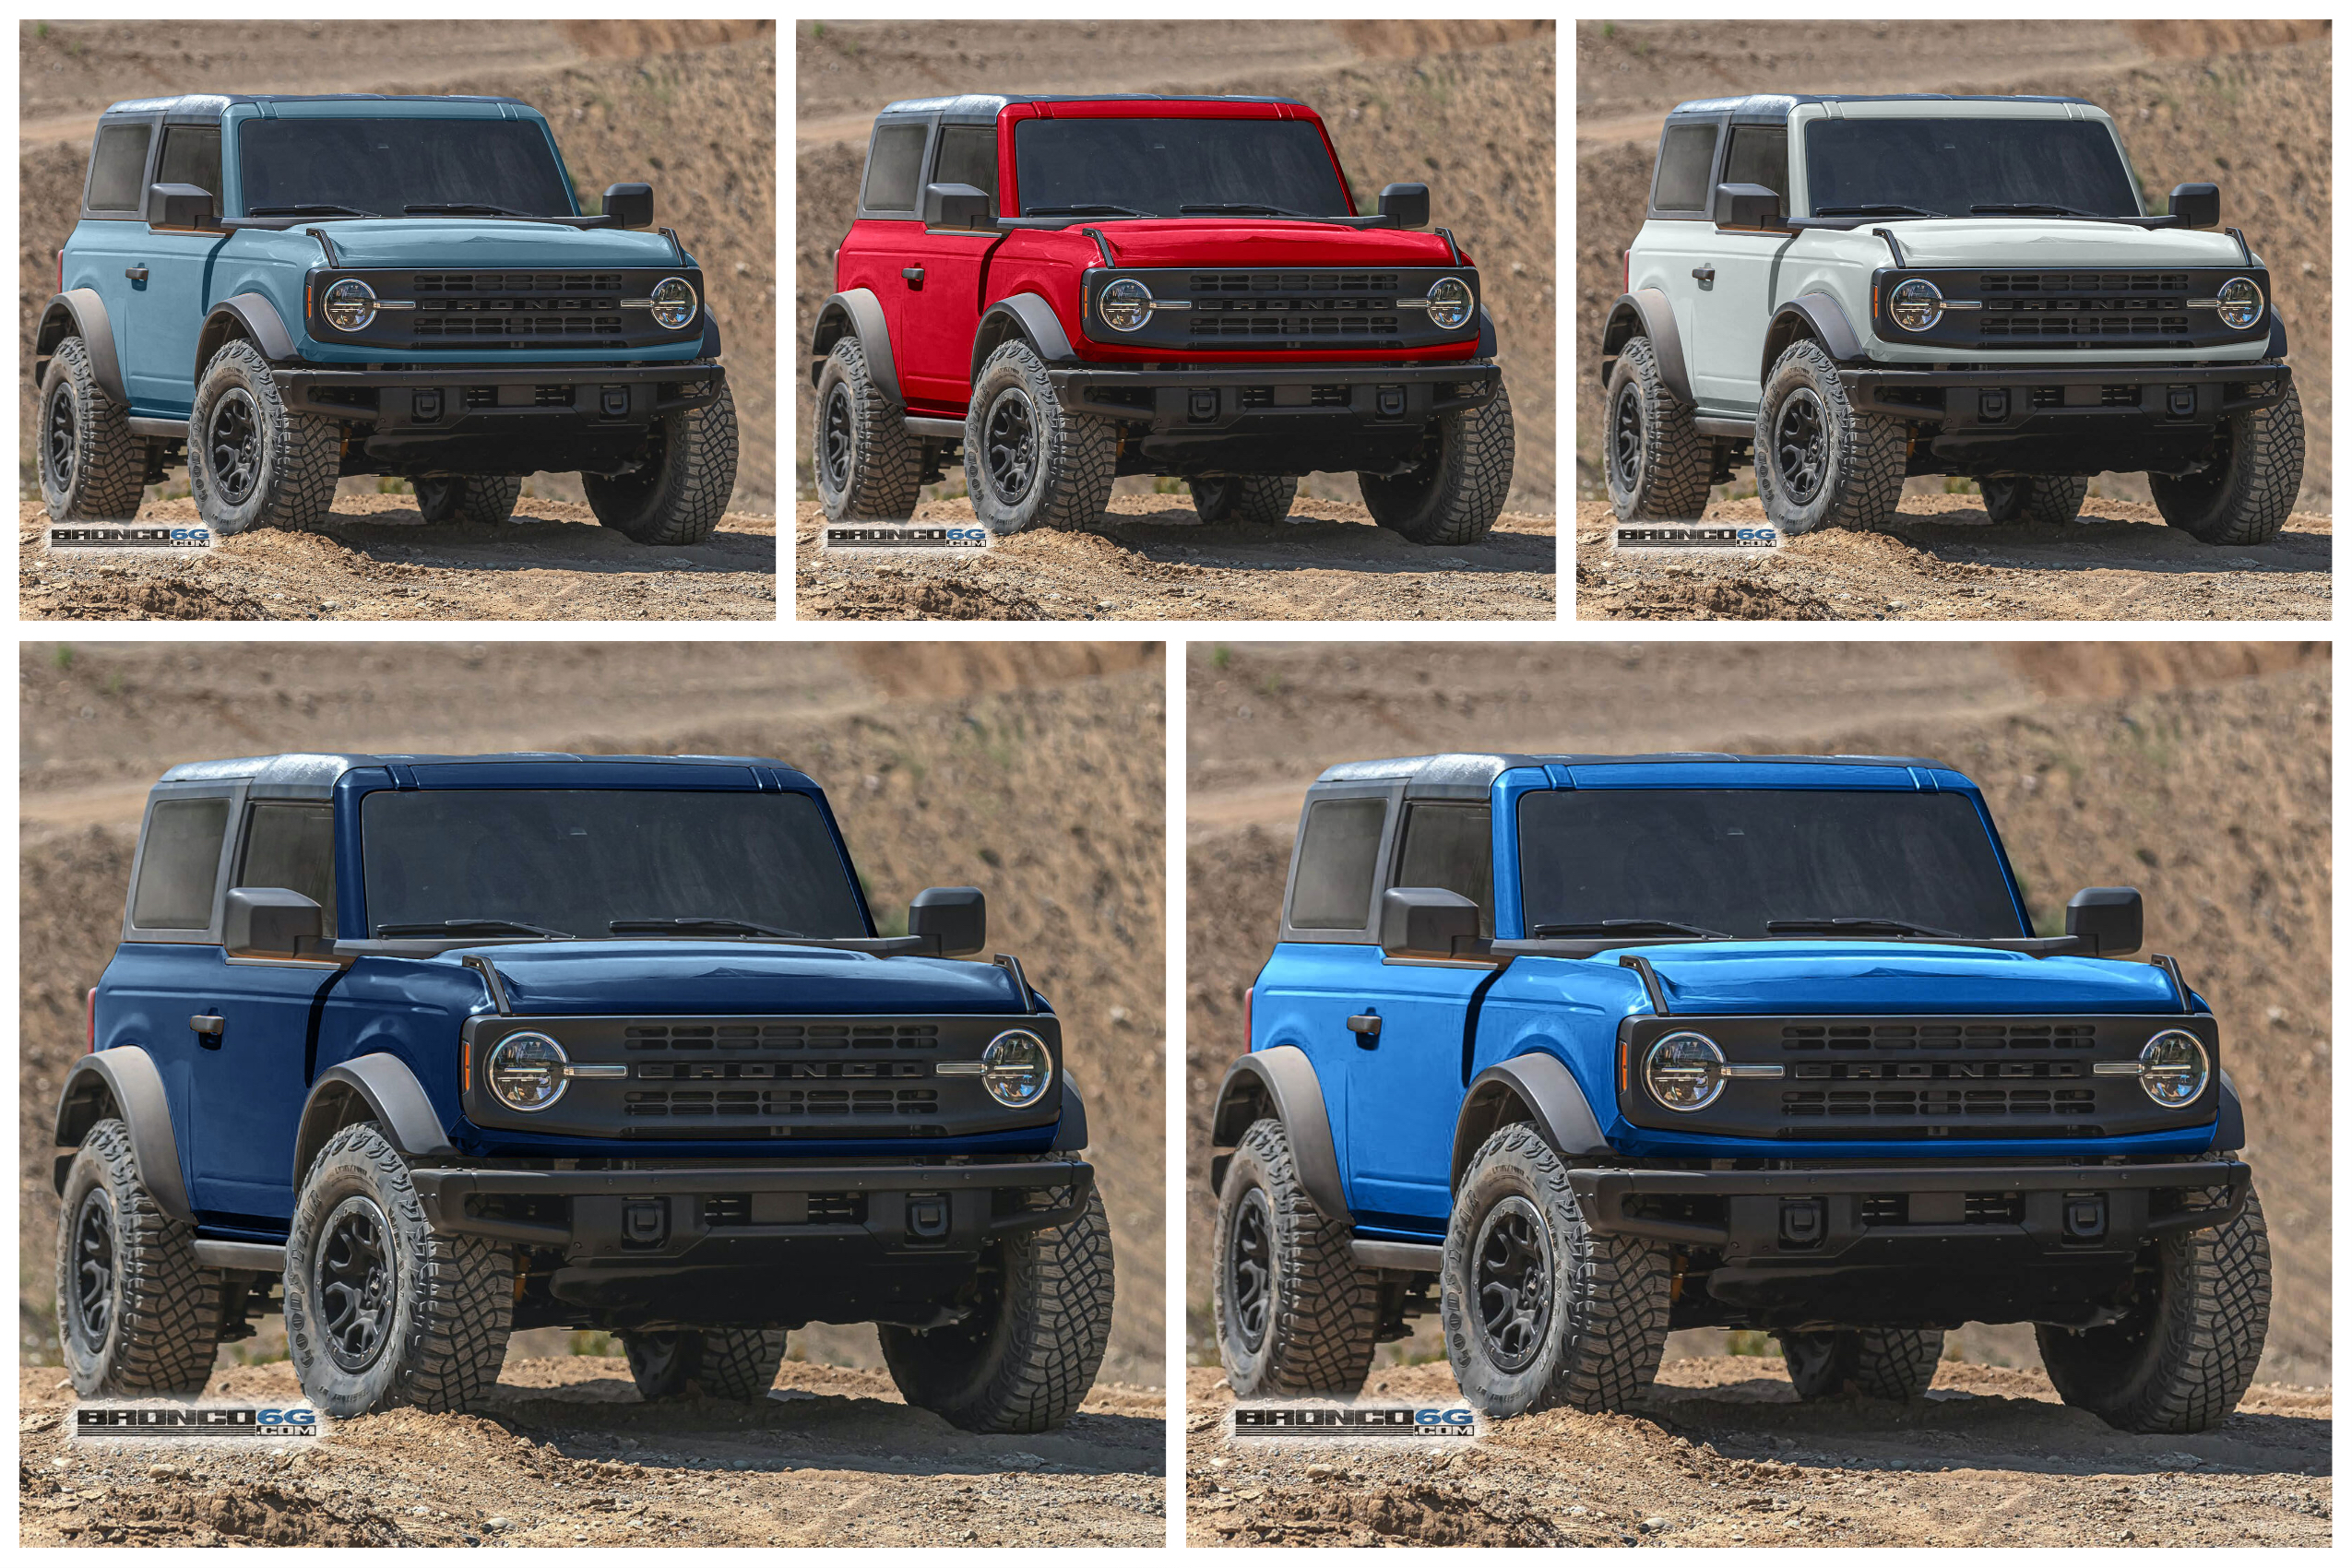 bronco sasquatch 2 door simulated in production colors bronco6g 2021 ford bronco forum news blog owners community bronco sasquatch 2 door simulated in